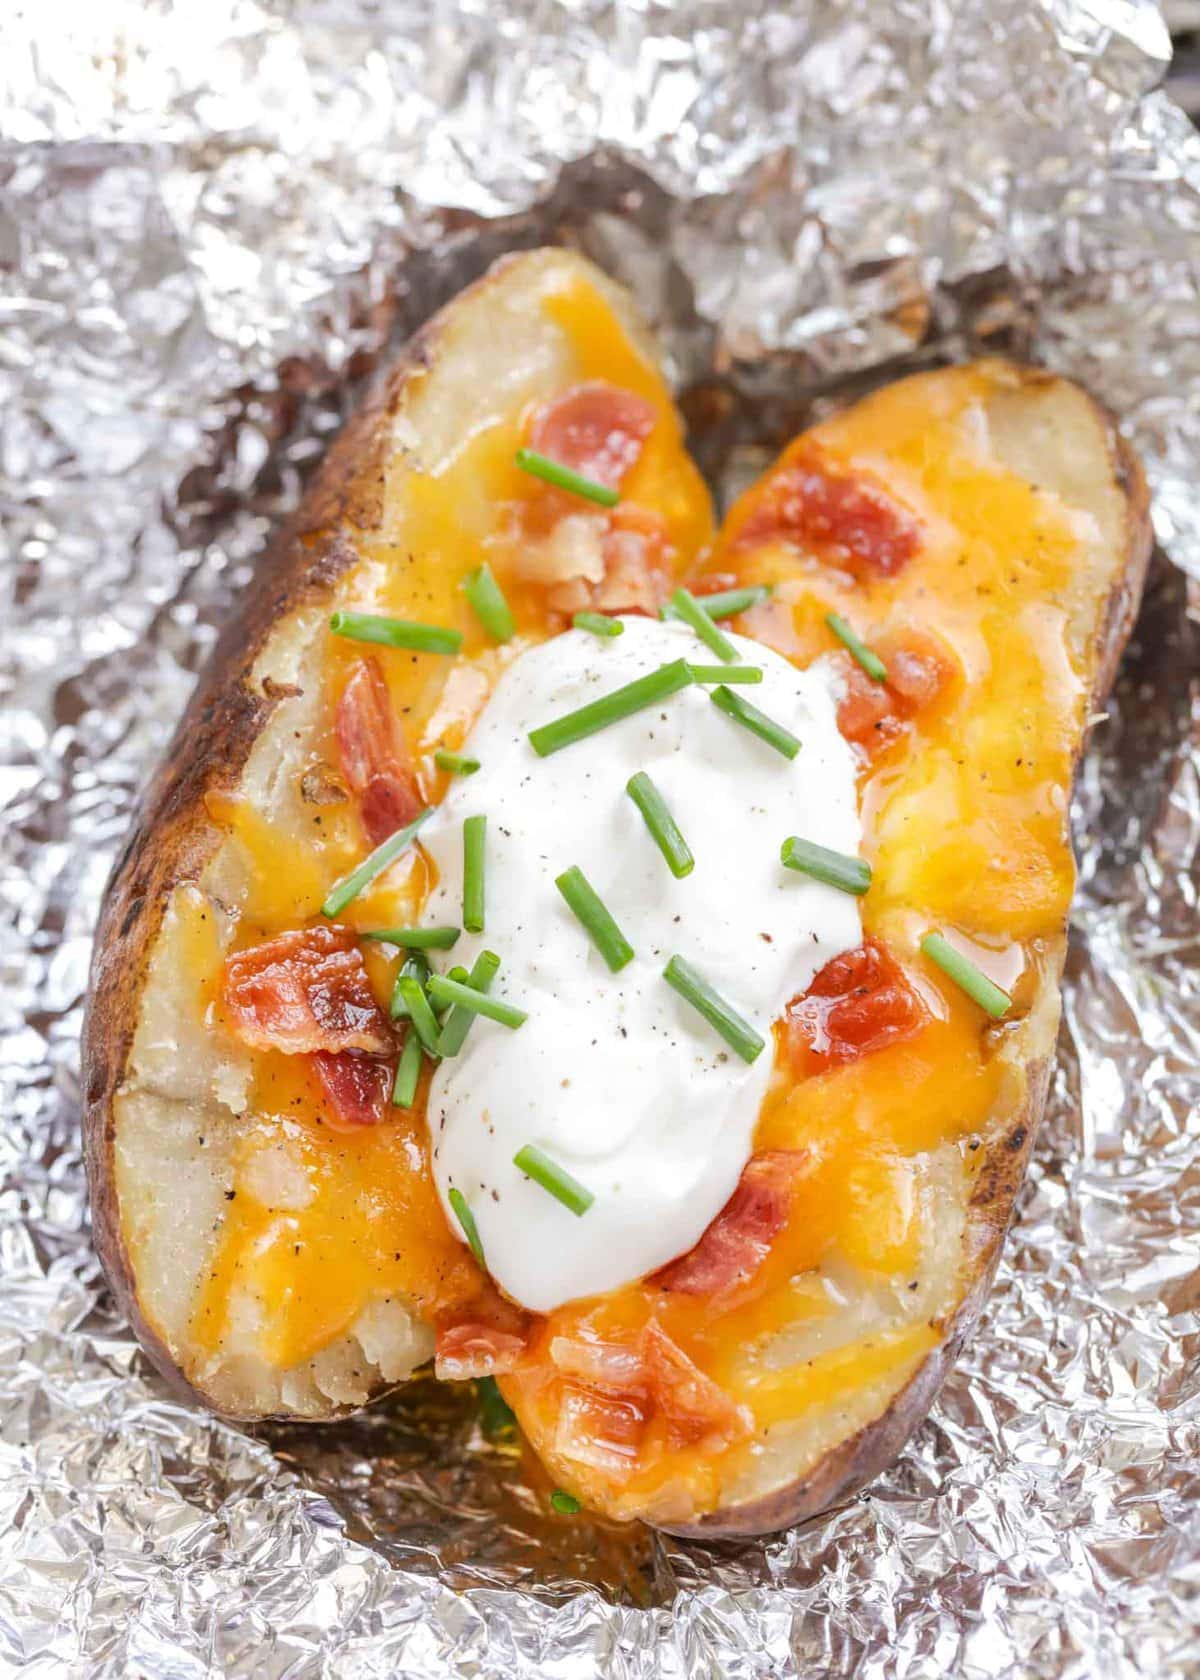 Crock pot baked potato with toppings